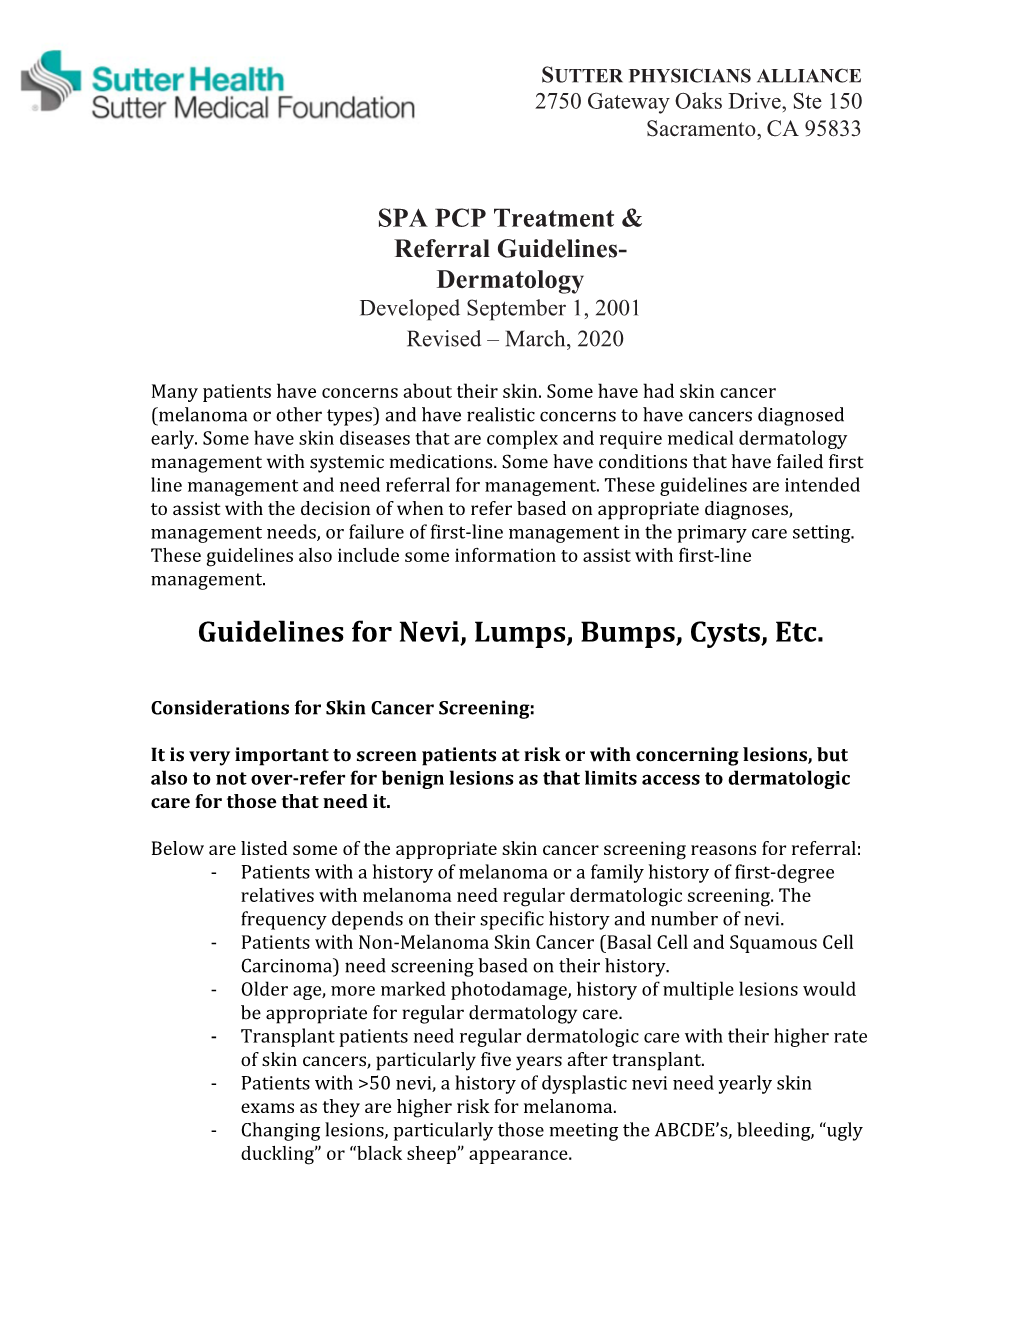 SPA PCP Treatment & Referral Guidelines-Dermatology